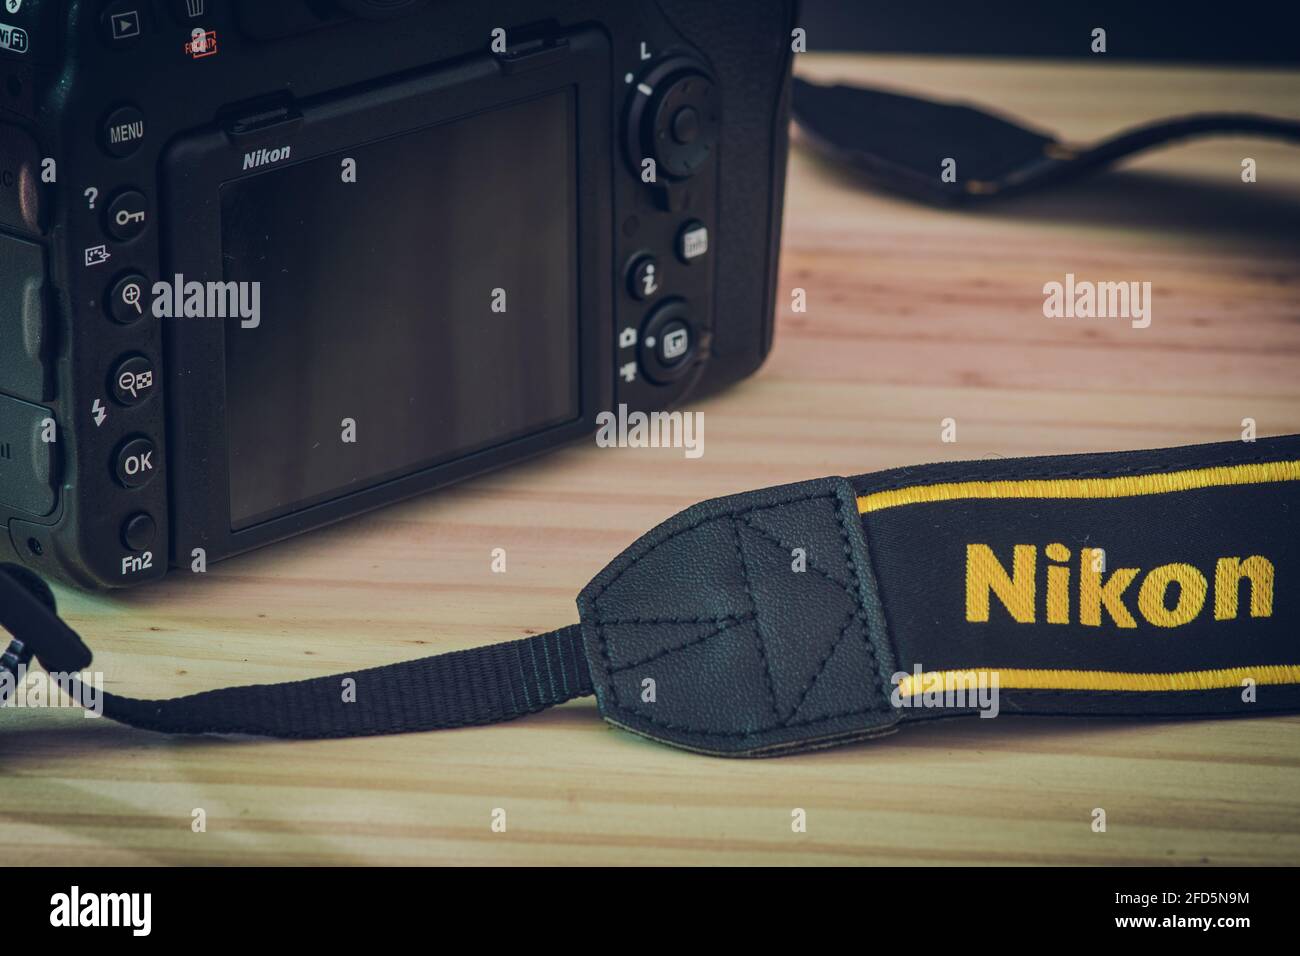 Sri Lanka - 02 17 2021: Modern professional level DSLR body and neck trap with Nikon brand name embraided on a wooden table, Nikon D850 close up photo Stock Photo